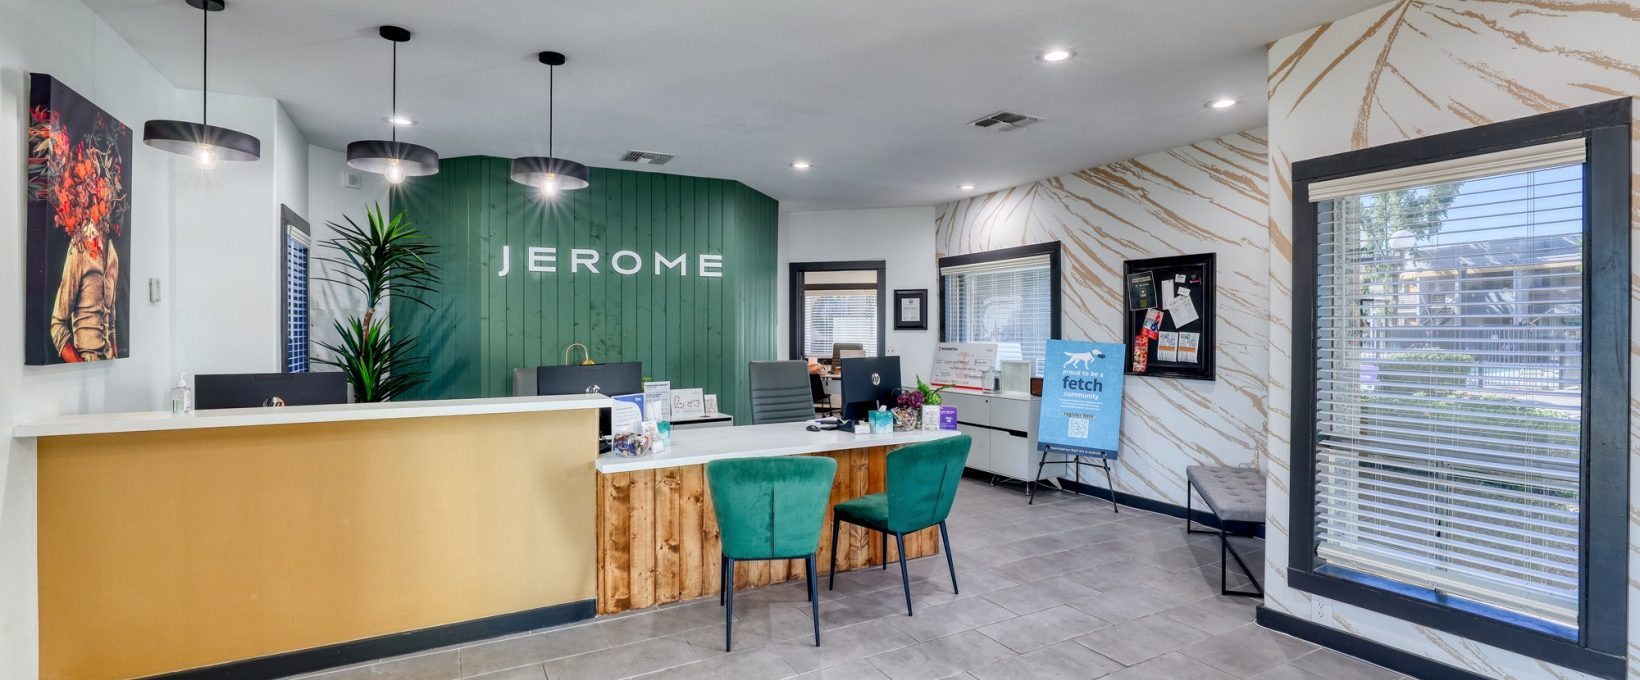 the front desk at The Jerome